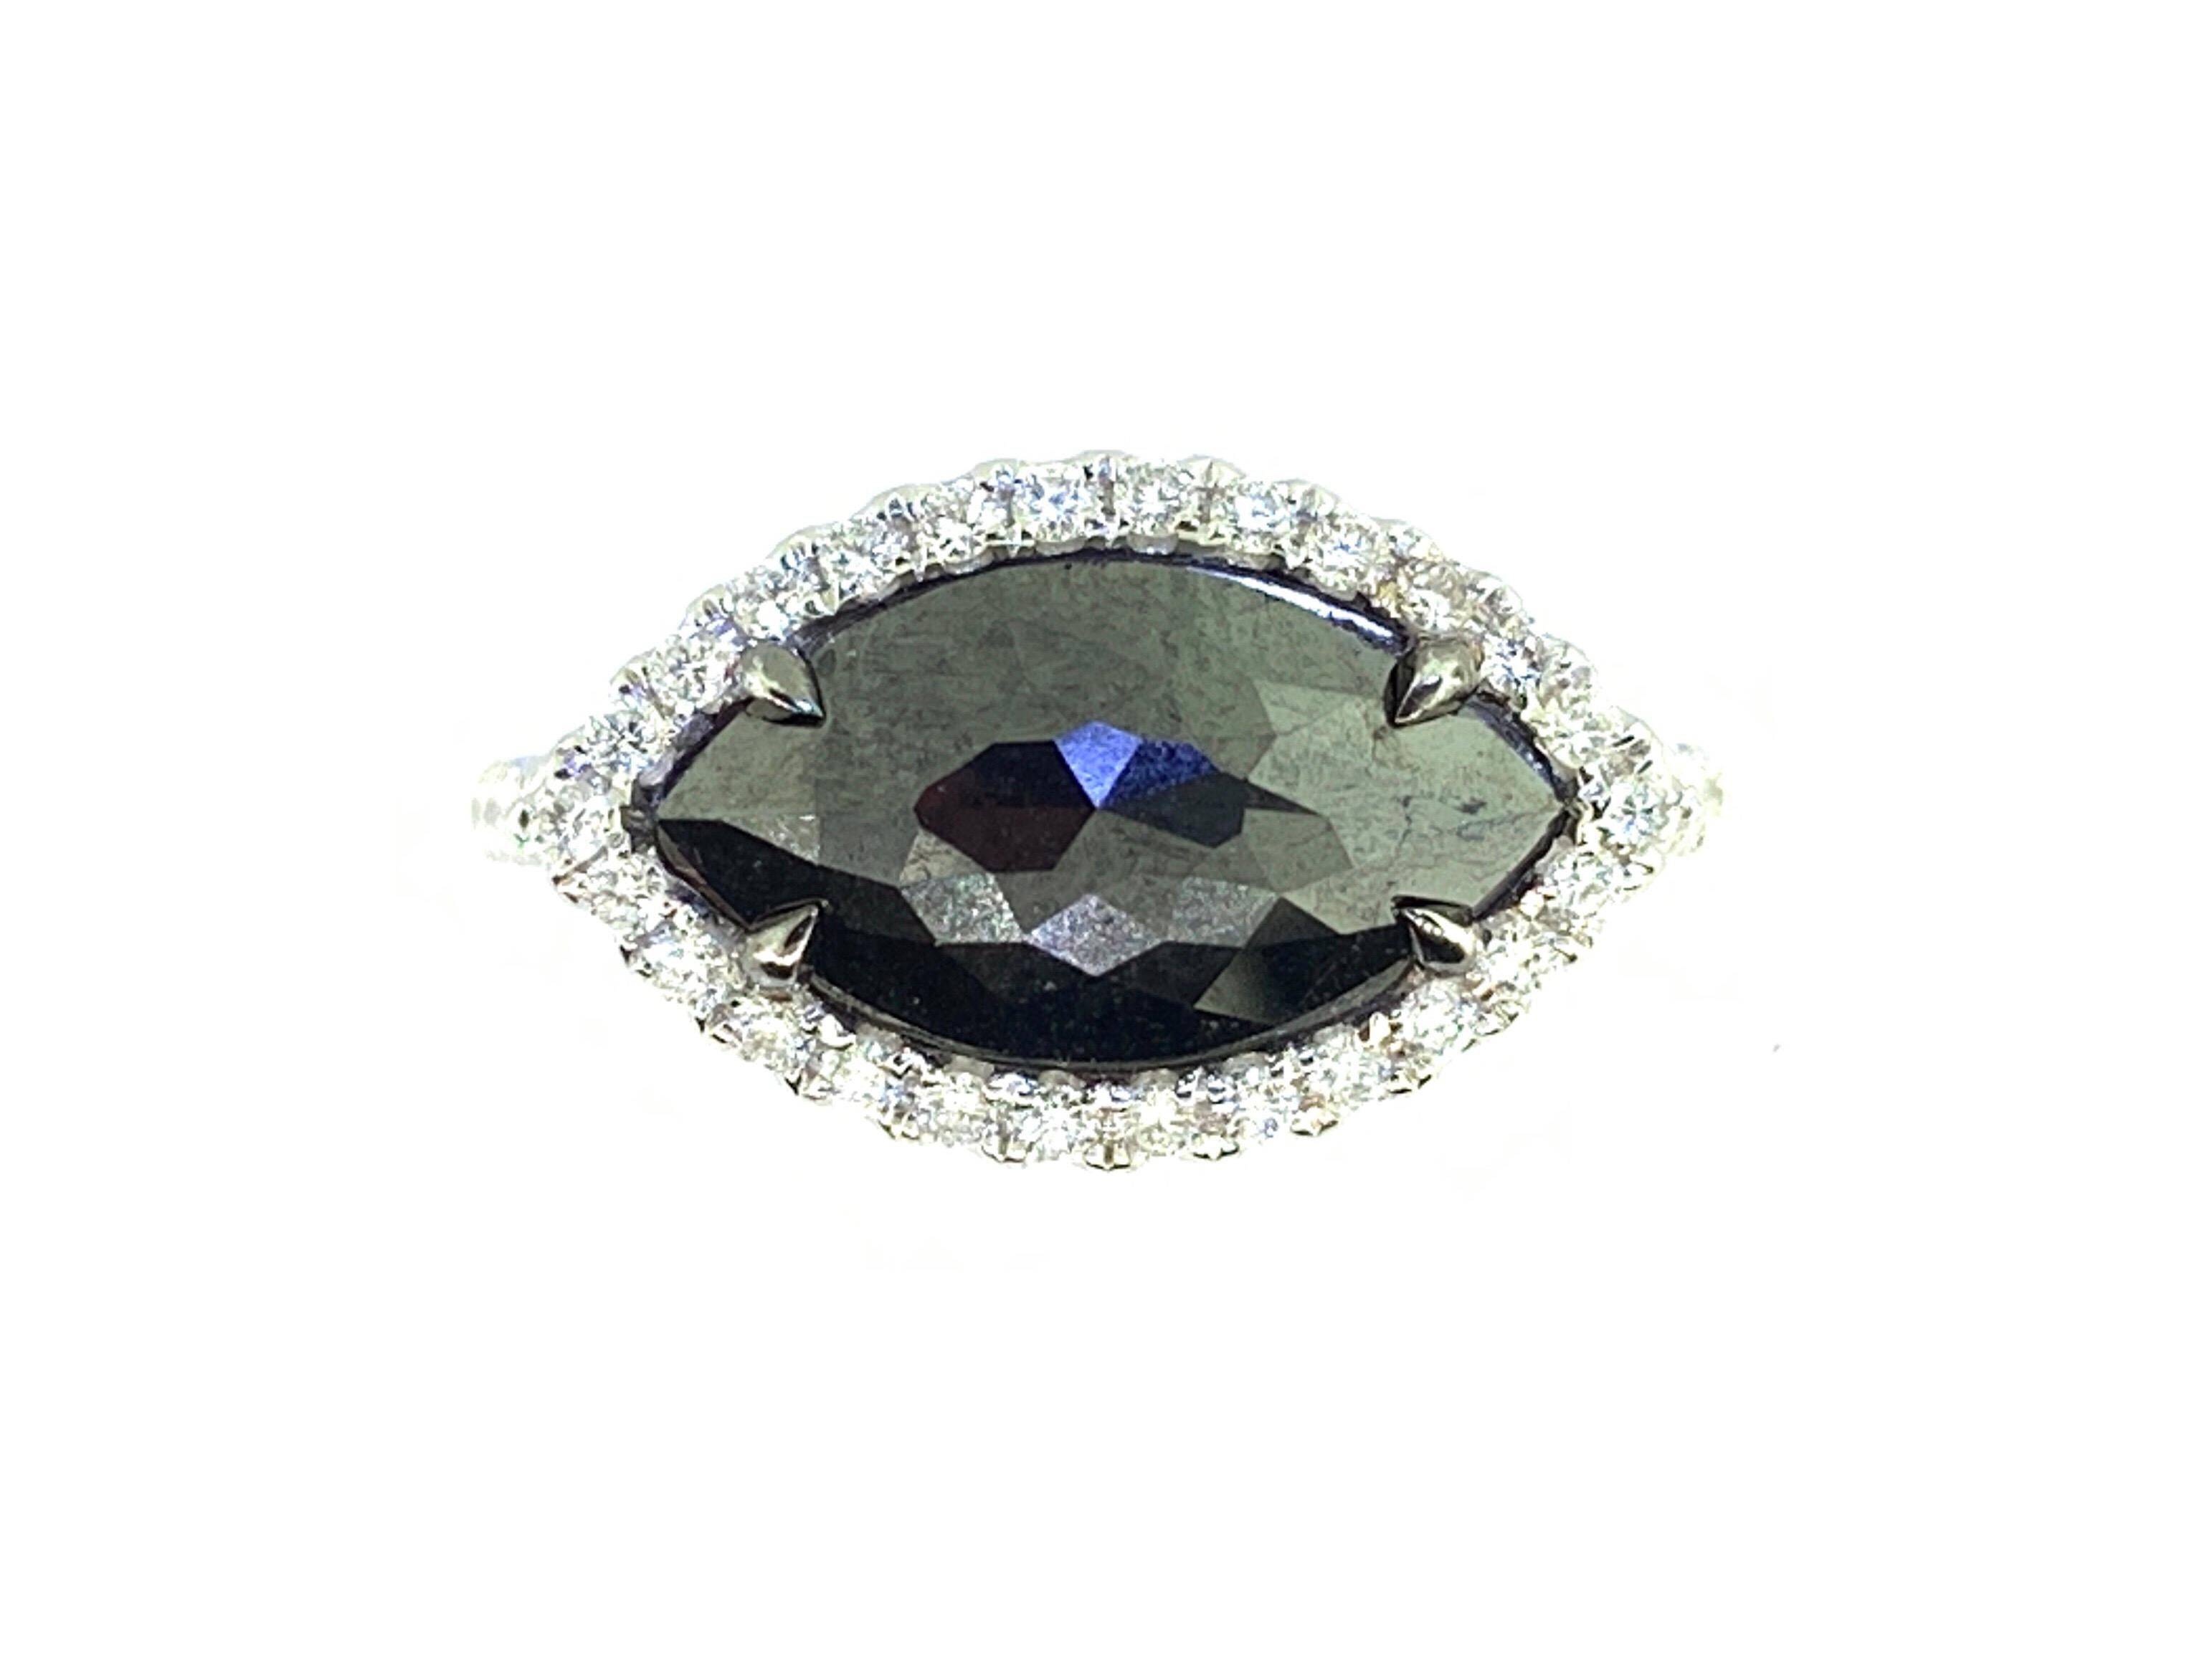 This stunning cocktail ring features a 2.59 Carat Rose Cut Marquise Black Diamond with a White Diamond Halo. The Black Diamond sits on a diamond shank and is set in 18k white gold. 
Total Diamond Weight (not including center stone) = 0.47 carats.